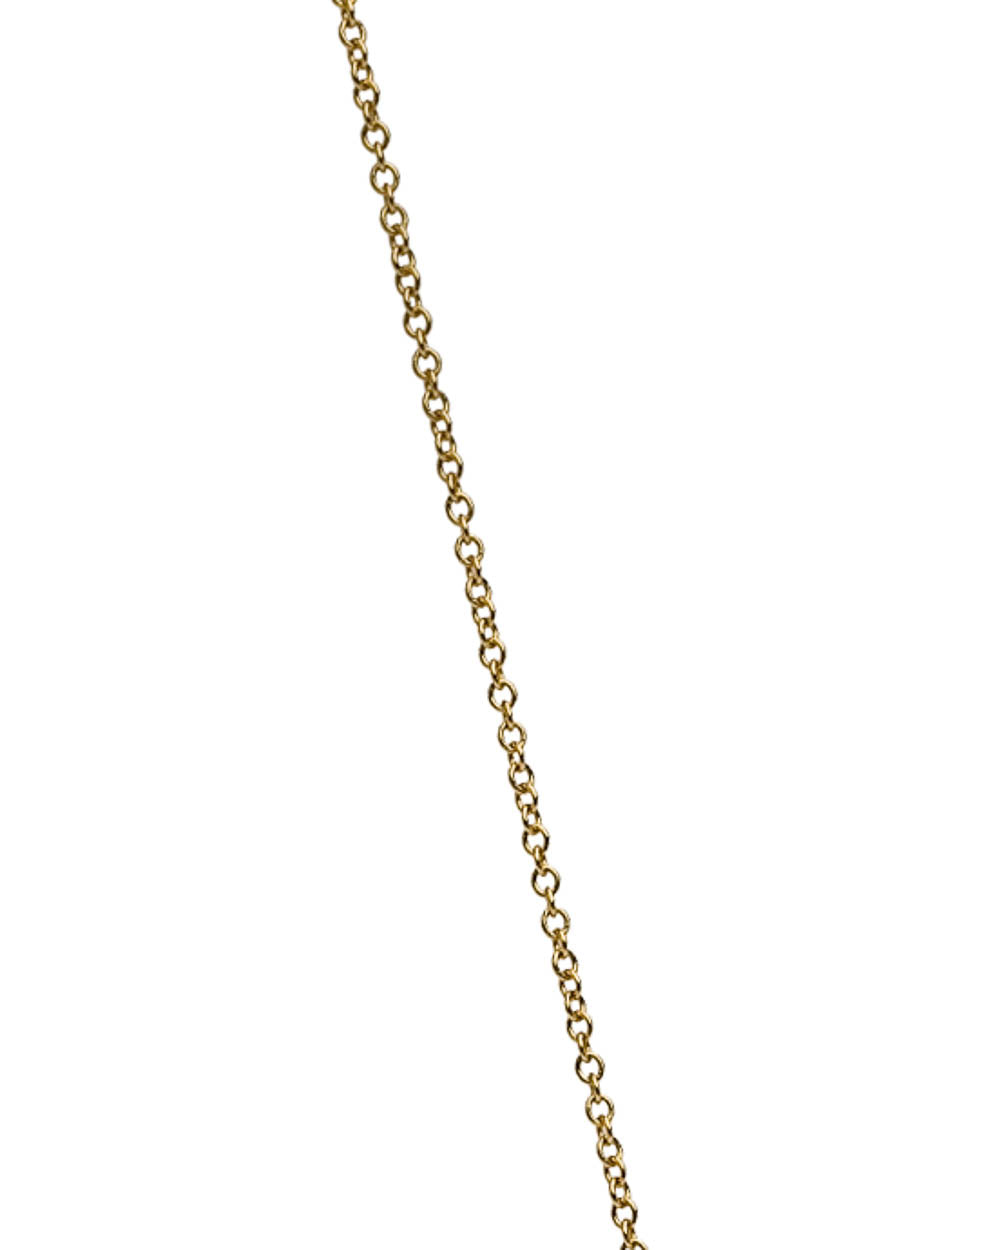 Two Tone Gold Tiny Halo Lightkeeper Necklace